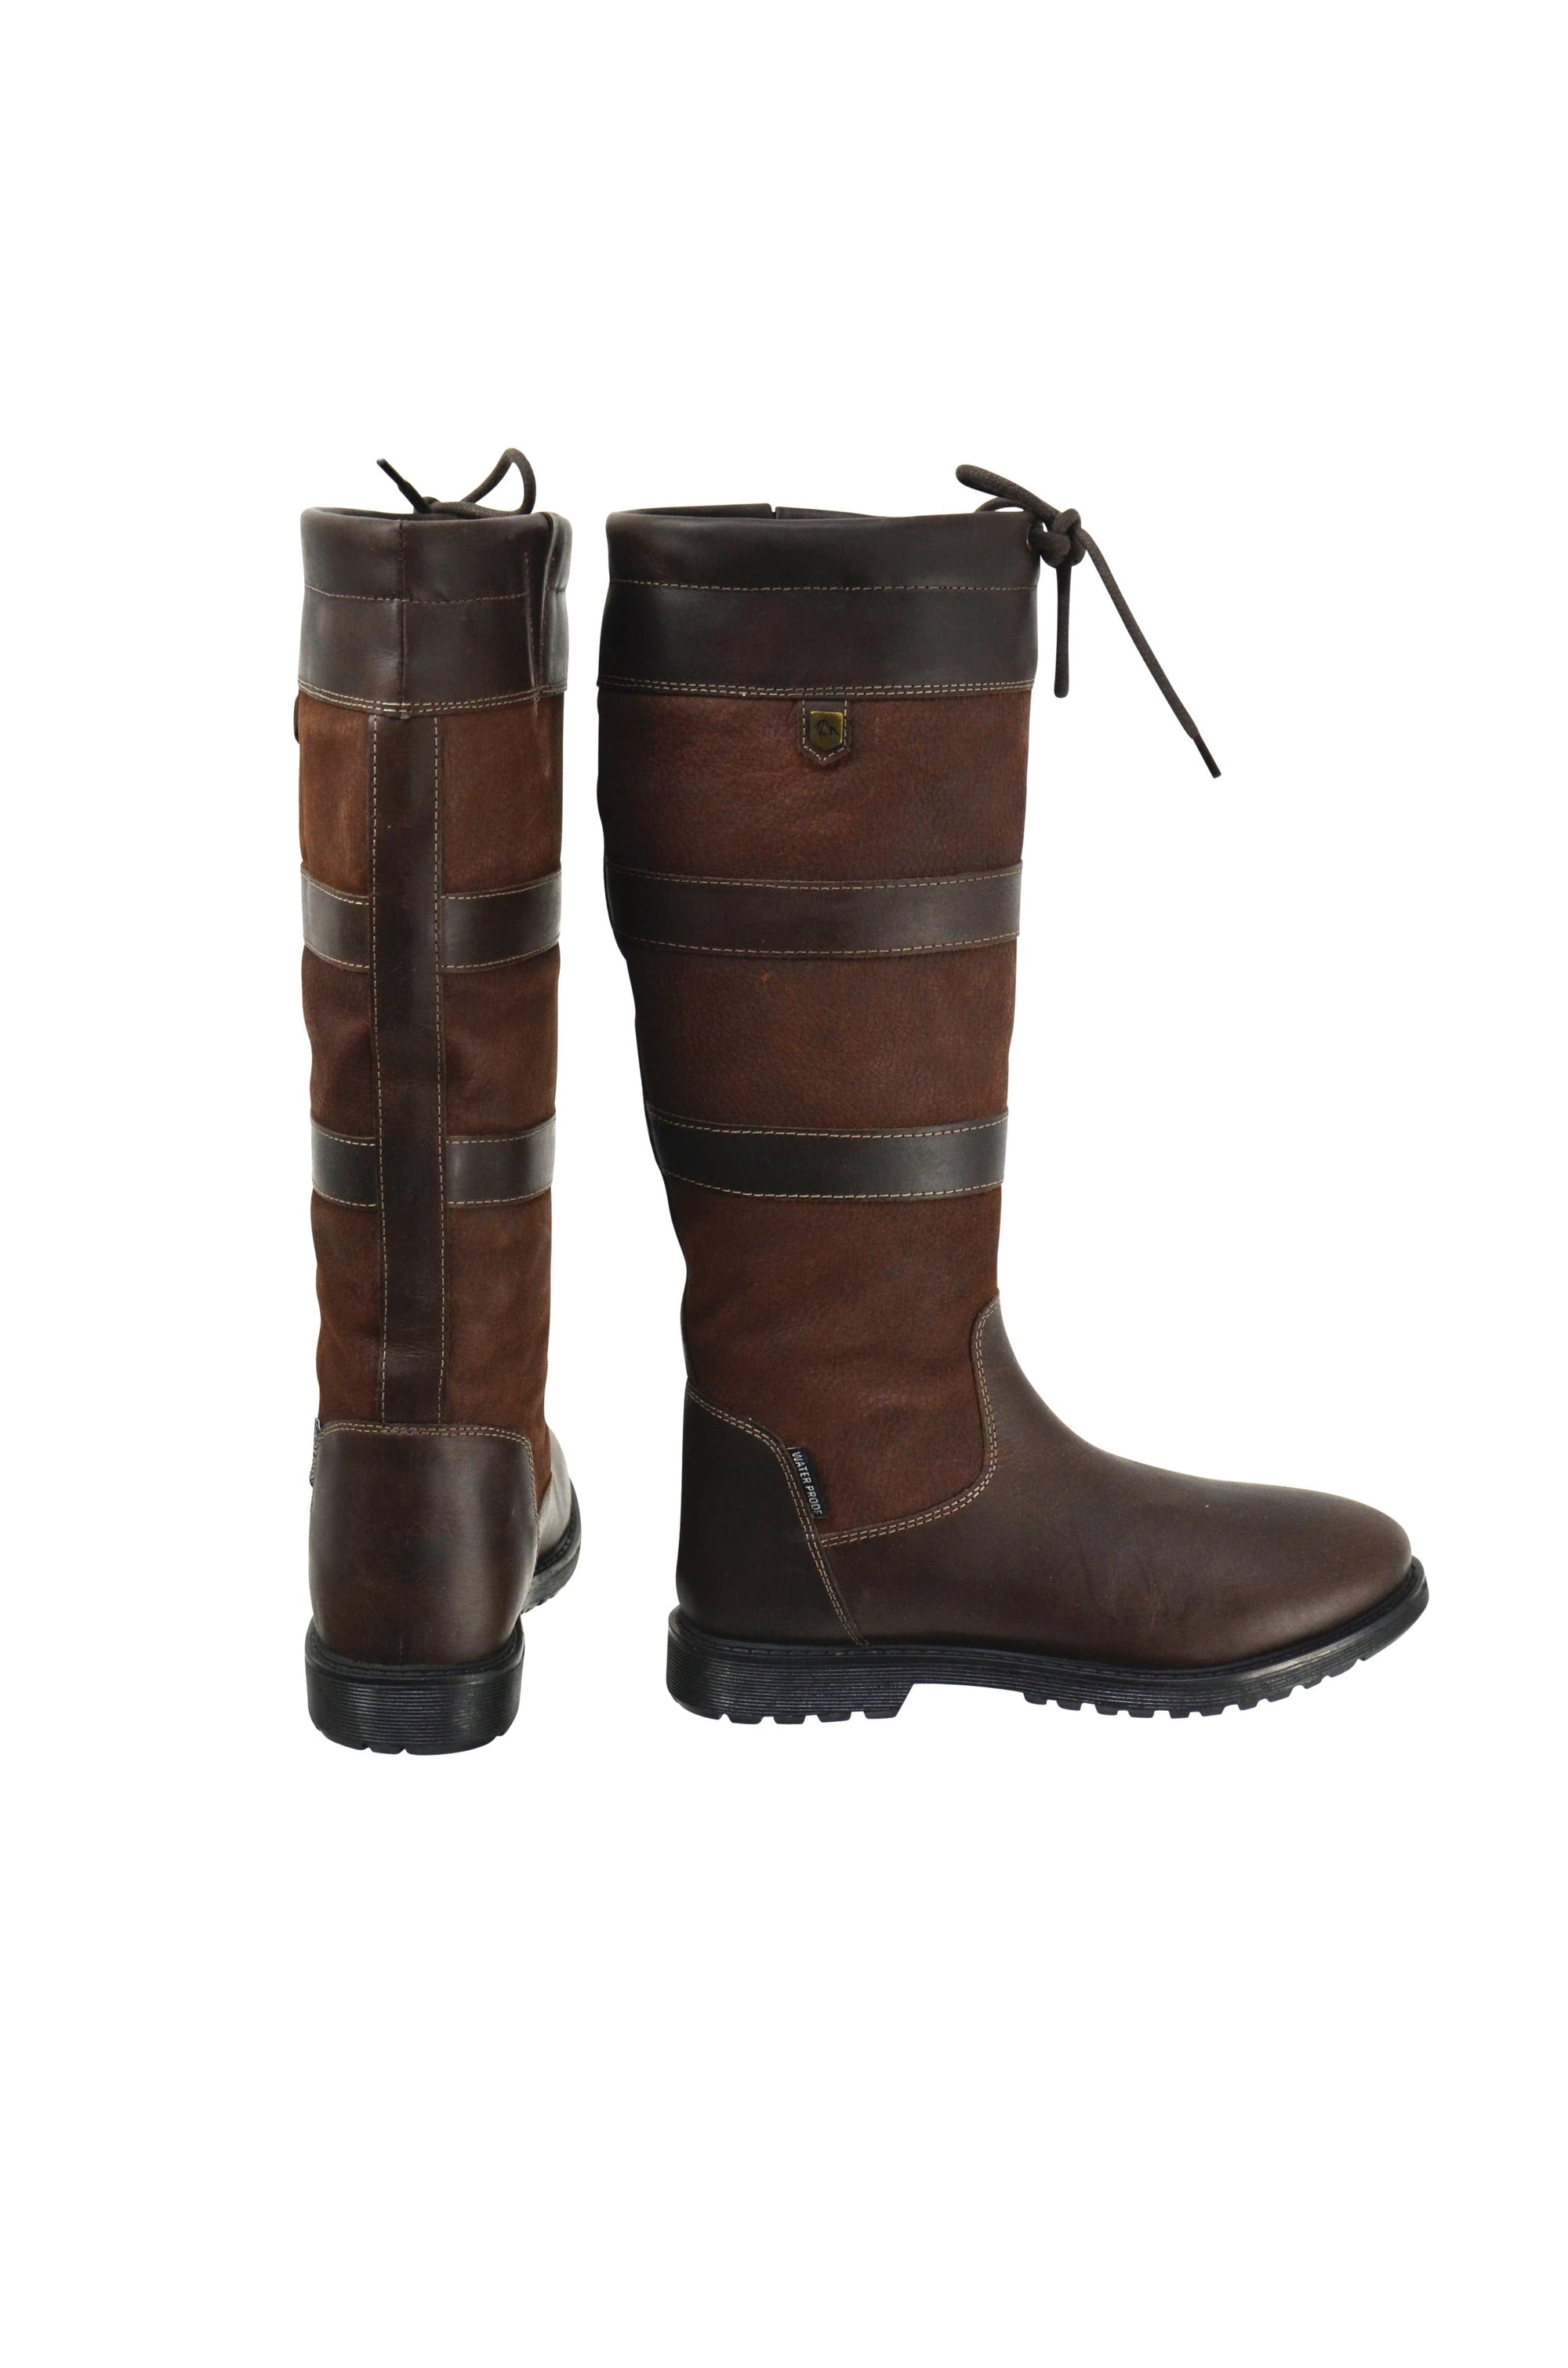 Hyland bakewell long country boot